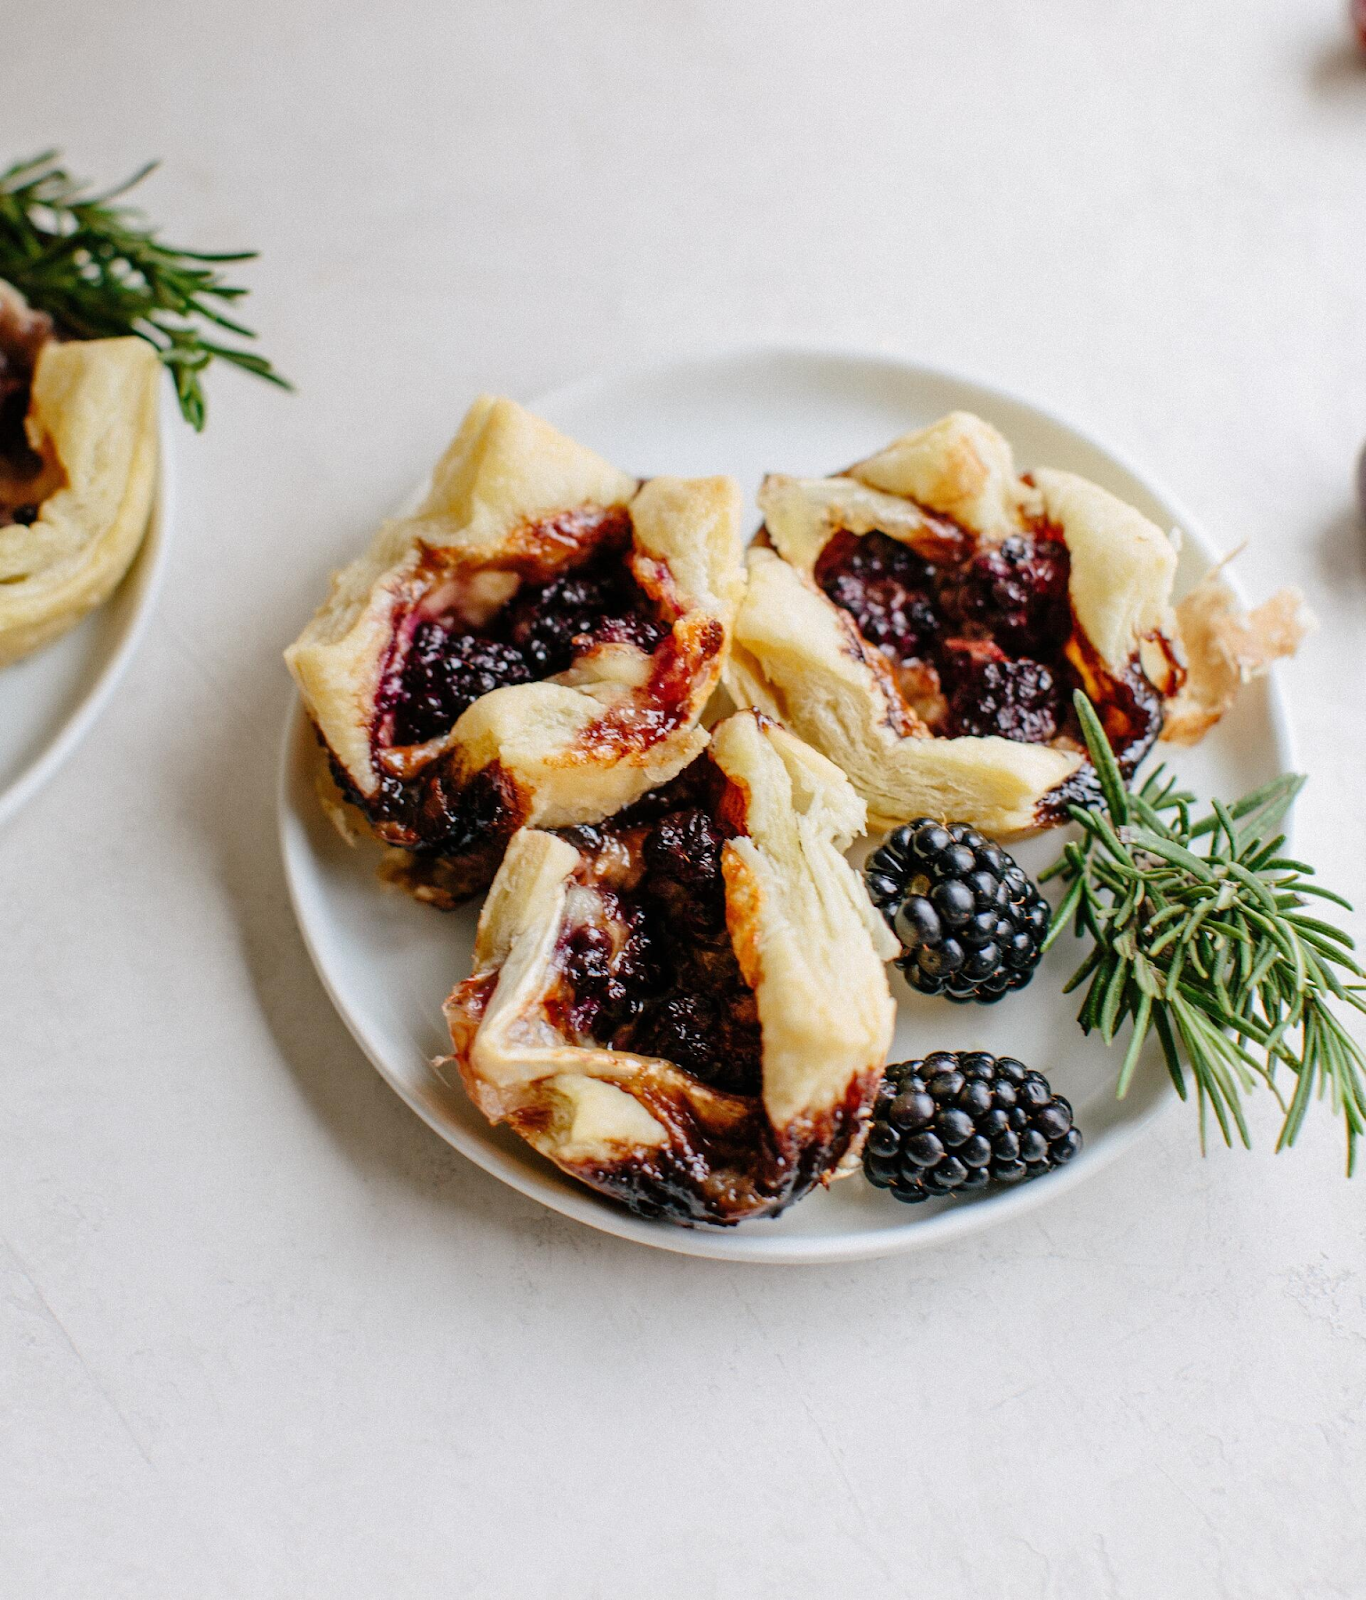 3 balsamic blackberry and brie puff pastry bites on a plate